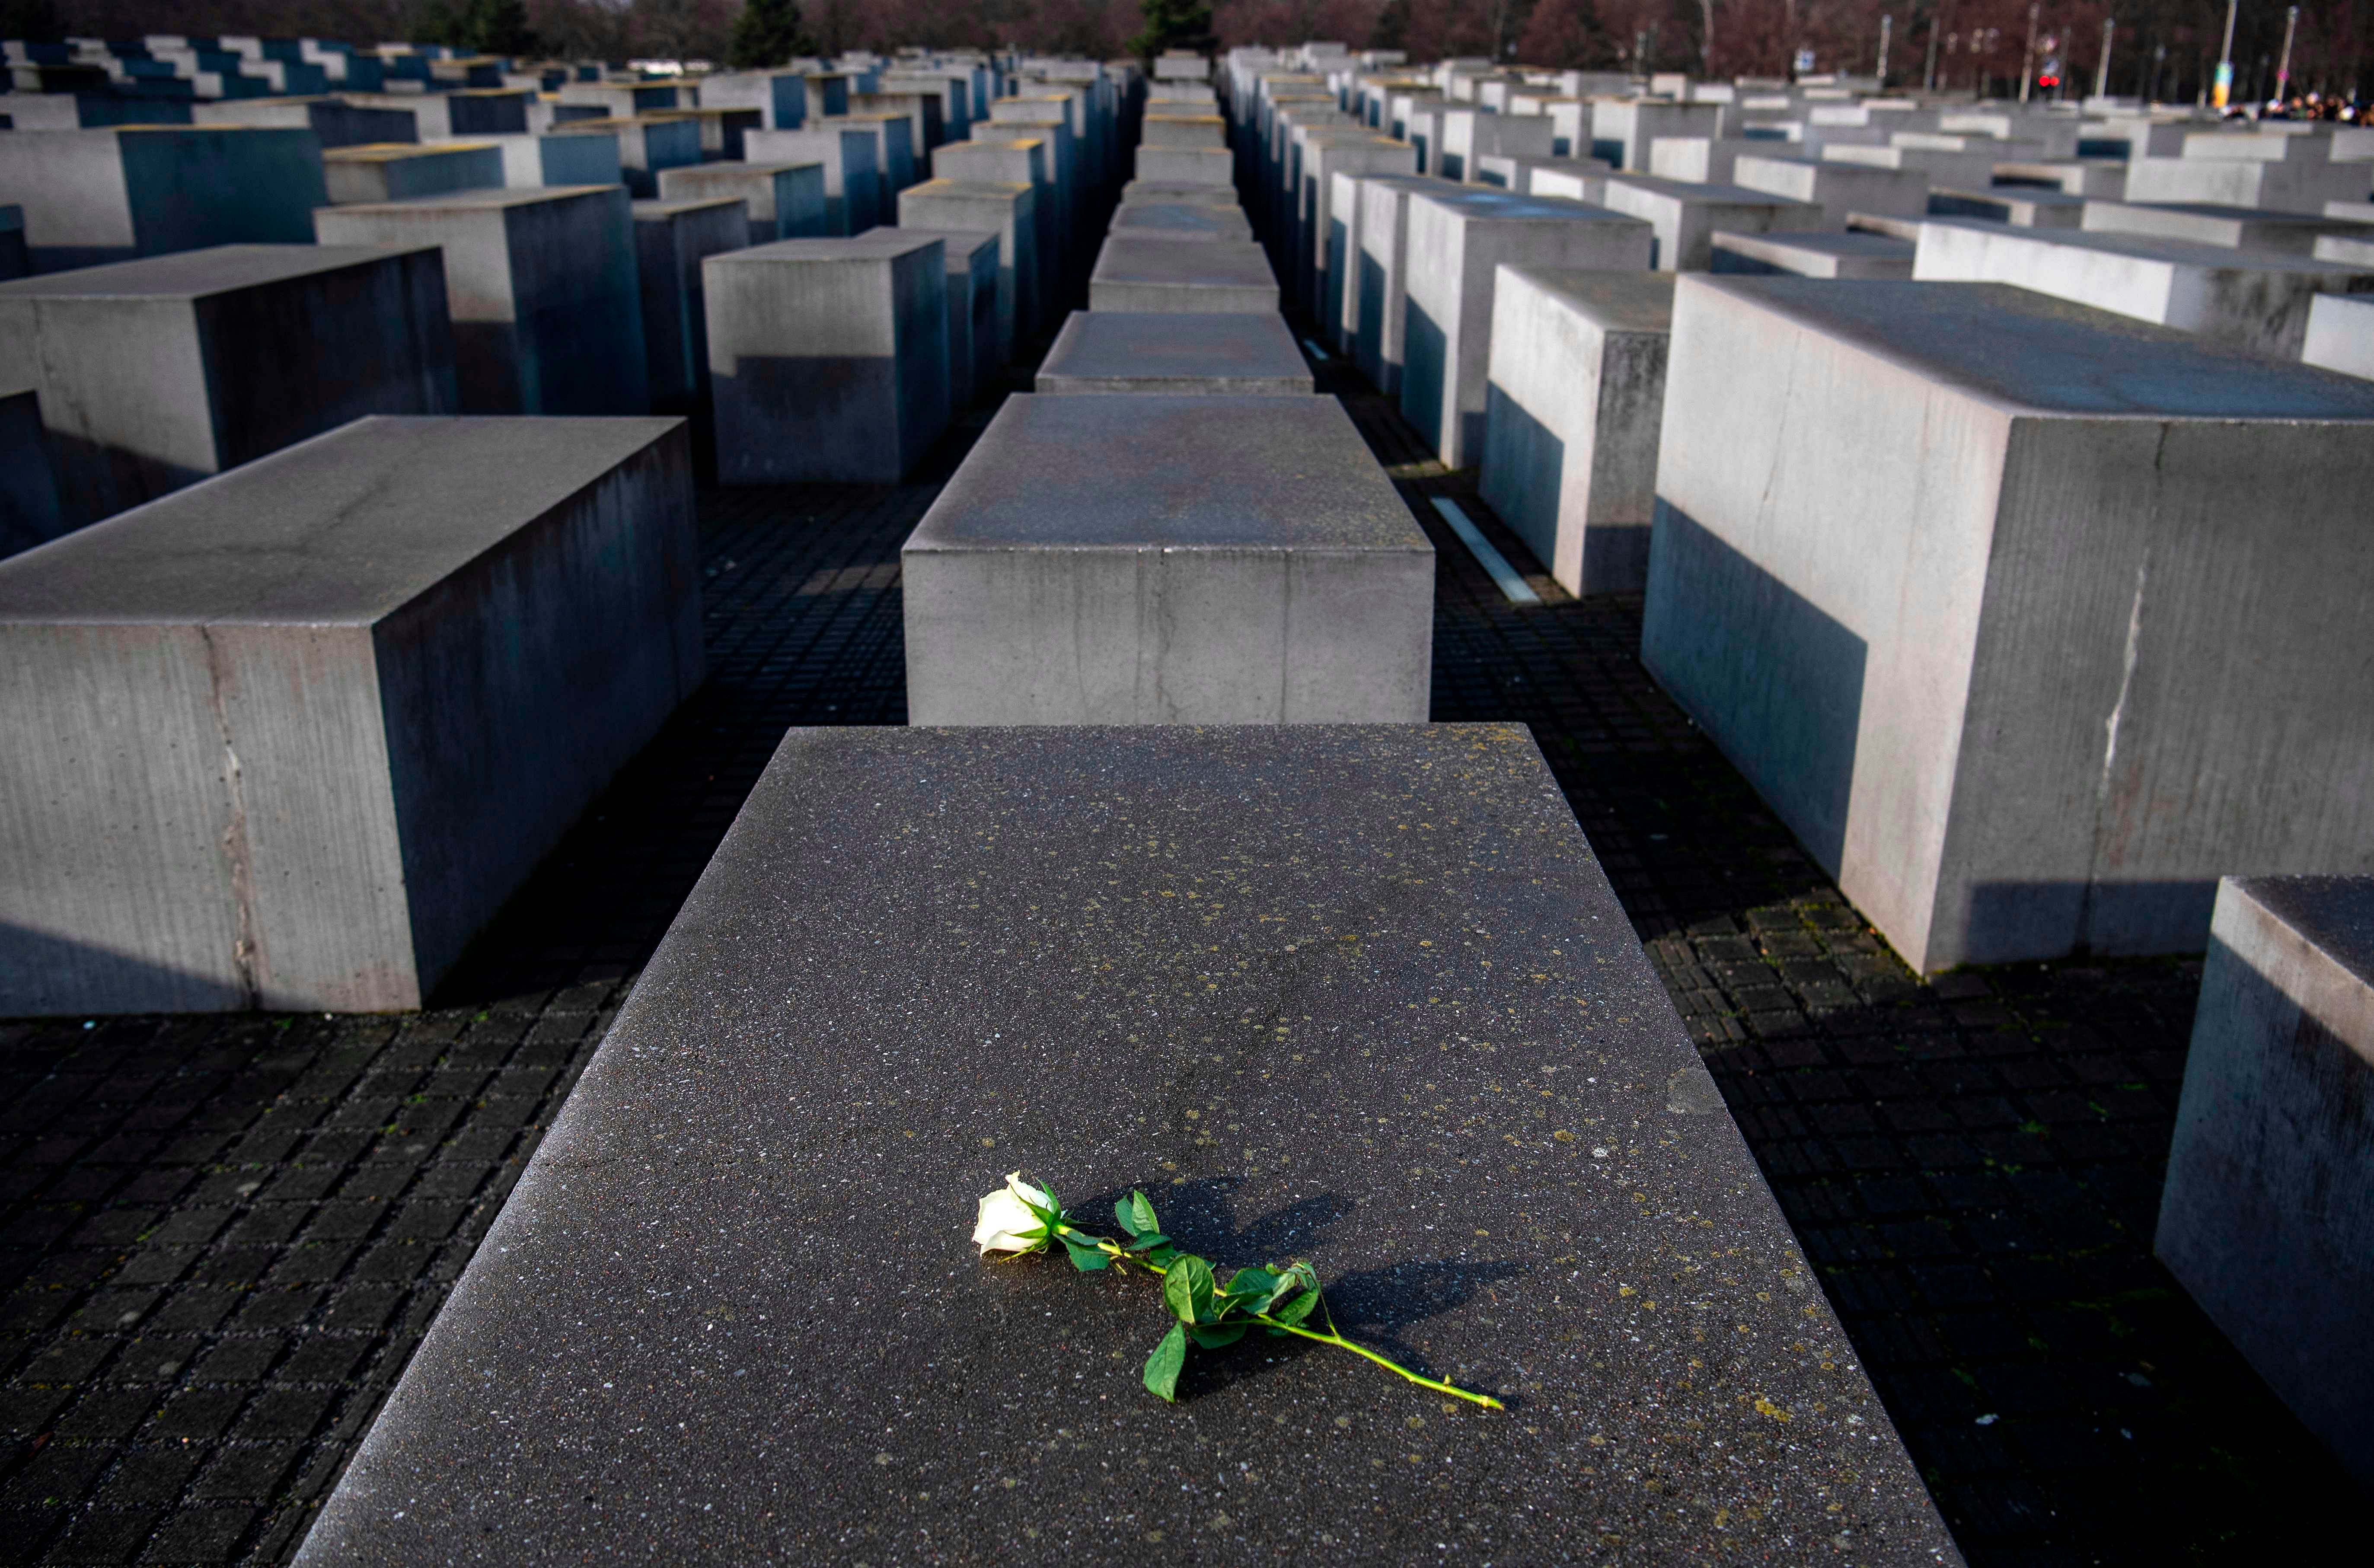 A rose lying on one of the concrete steles of the Memorial to the Murdered Jews of Europe (Holocaust memorial) in Berlin, to commemorate the 75th anniversary of the liberation by Soviet troops of the Auschwitz-Birkenau concentration camp in Poland. (AFP Photo)